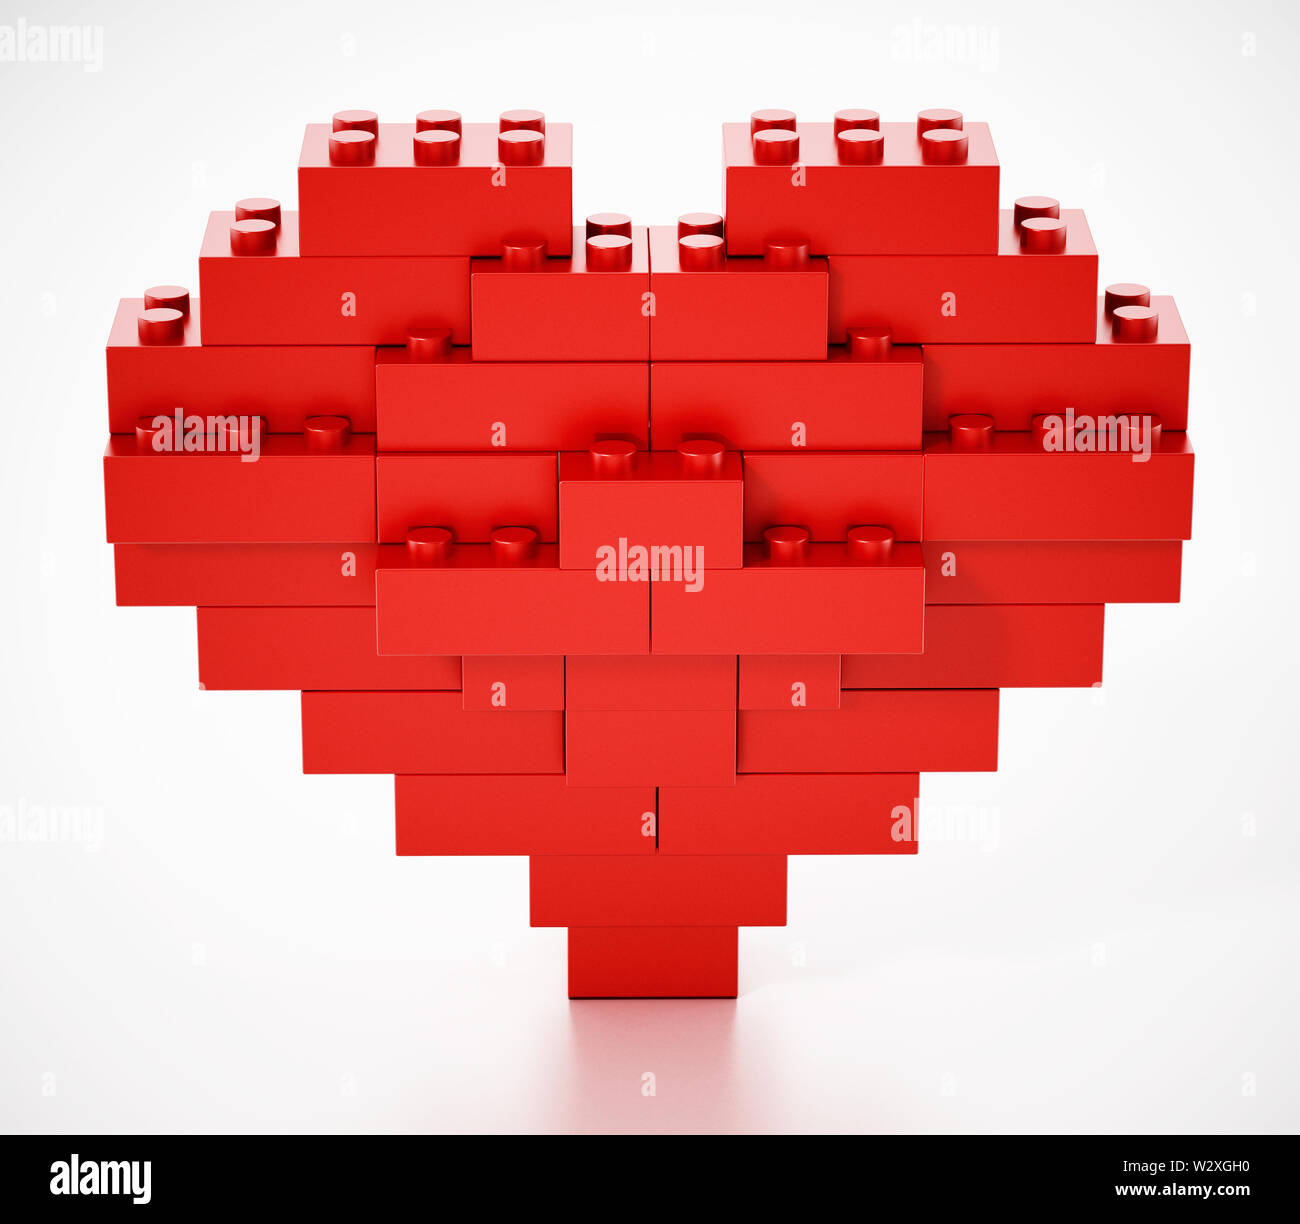 Red blocks forming a heart shape. 3D illustration. Stock Photo